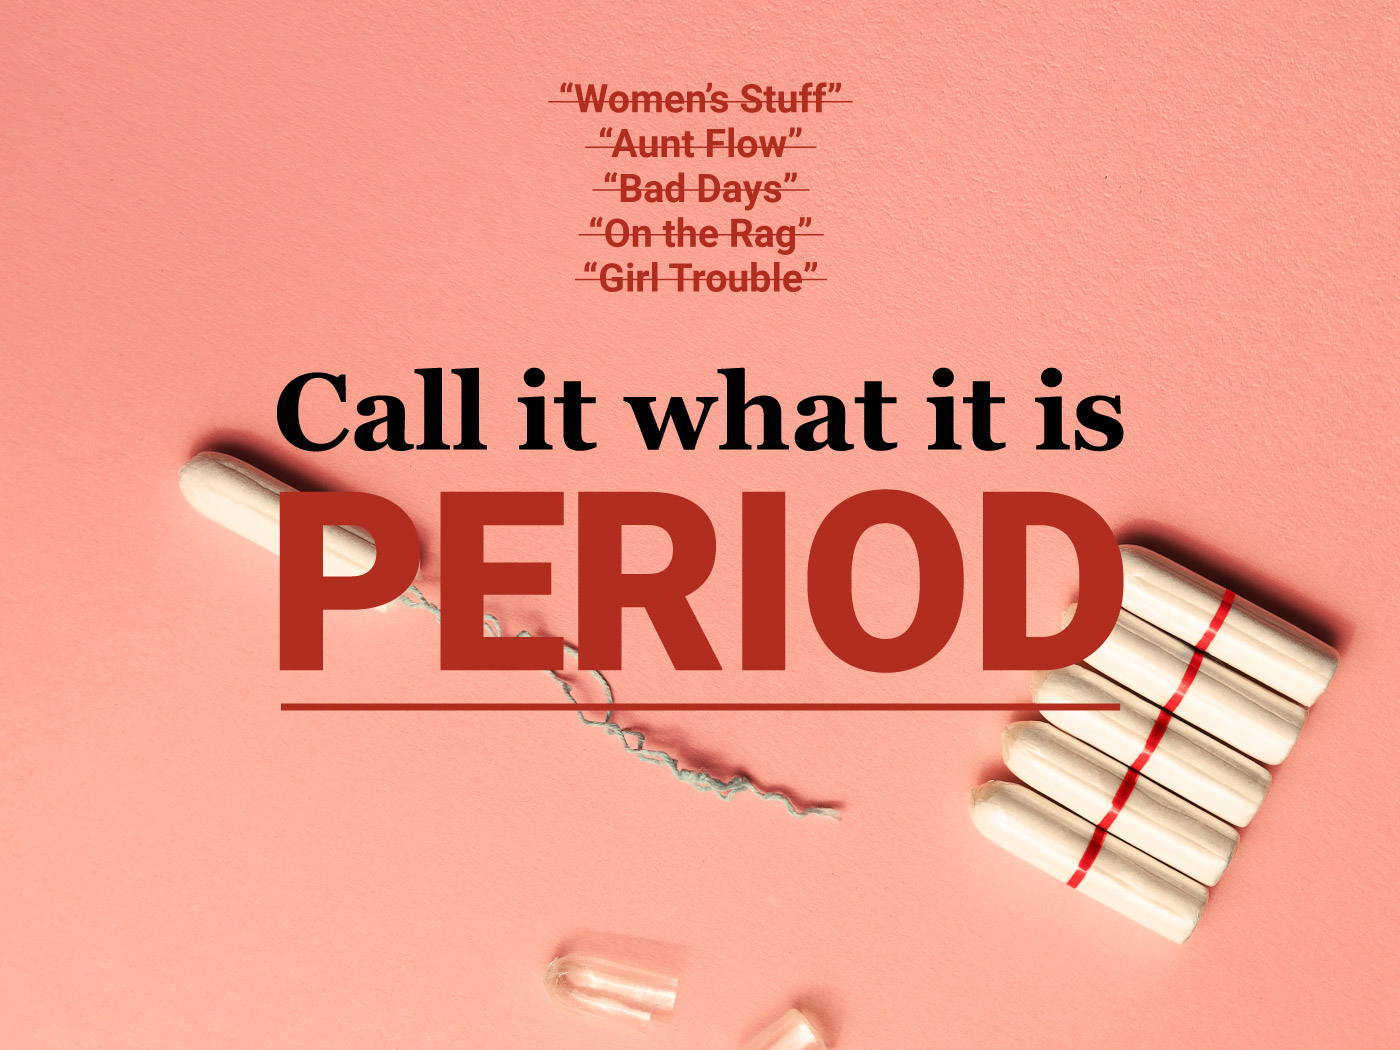 Calling it a period and only a period matters